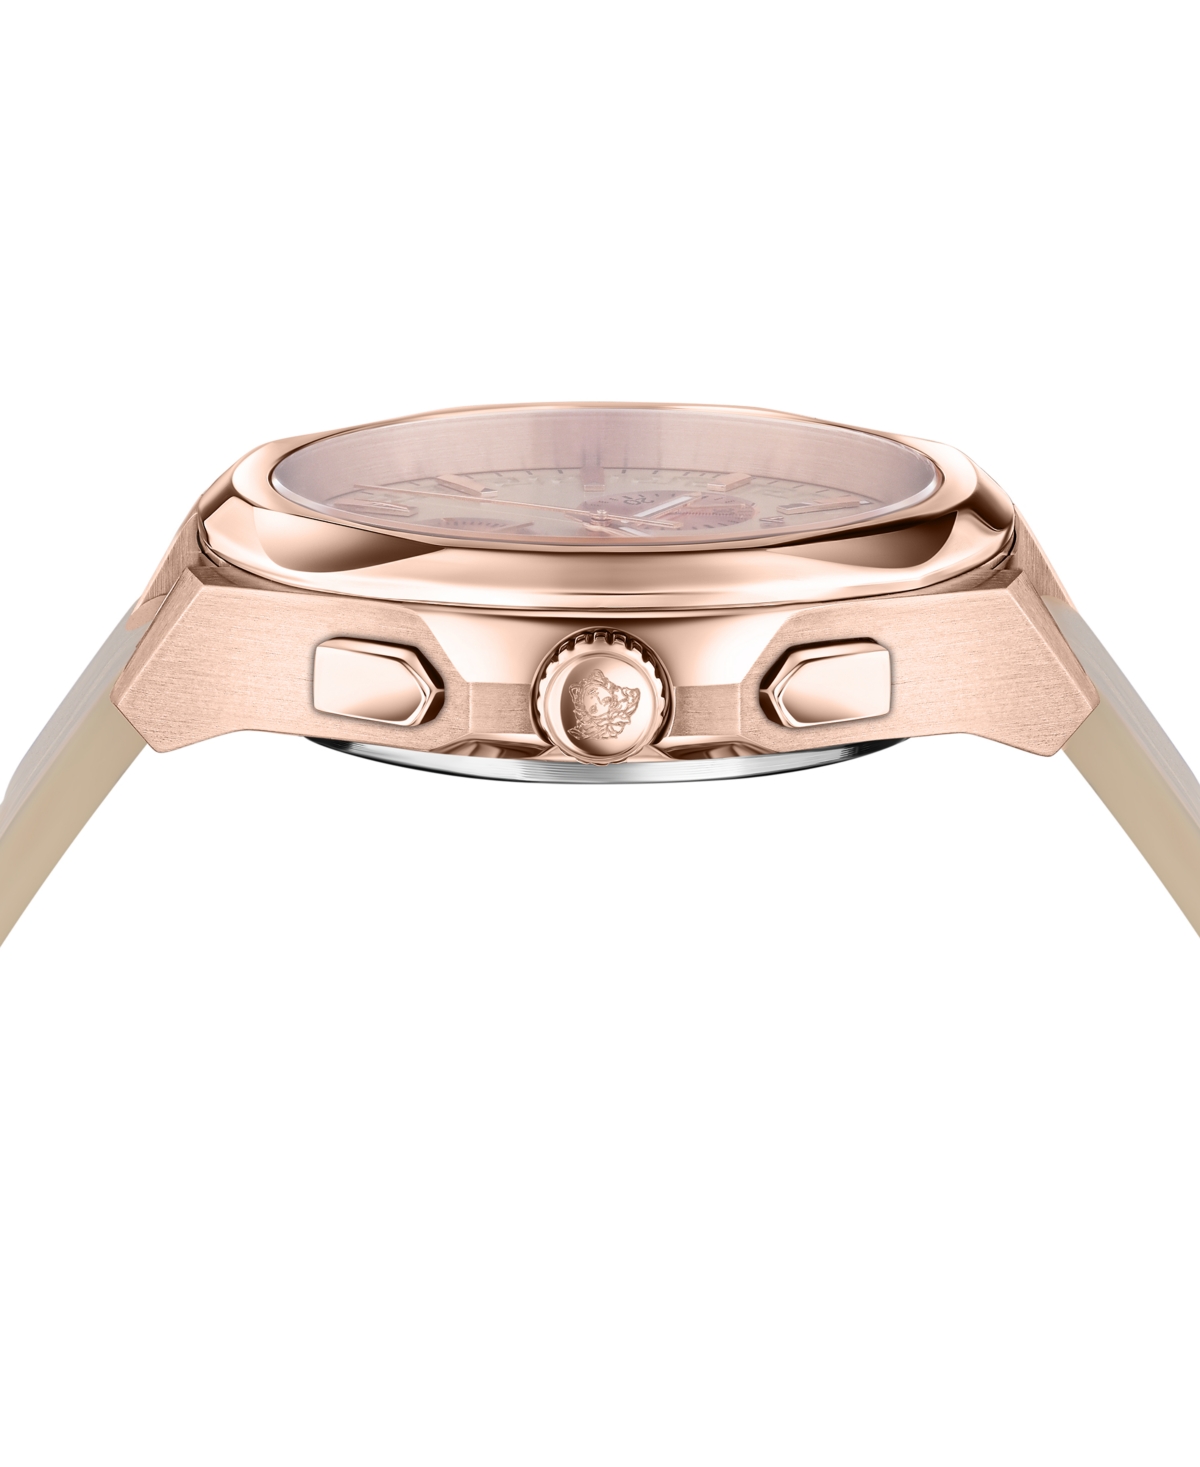 Shop Versace Women's Swiss Chronograph Medusa Ivory Leather Strap Watch 40mm In Ip Rose Gold